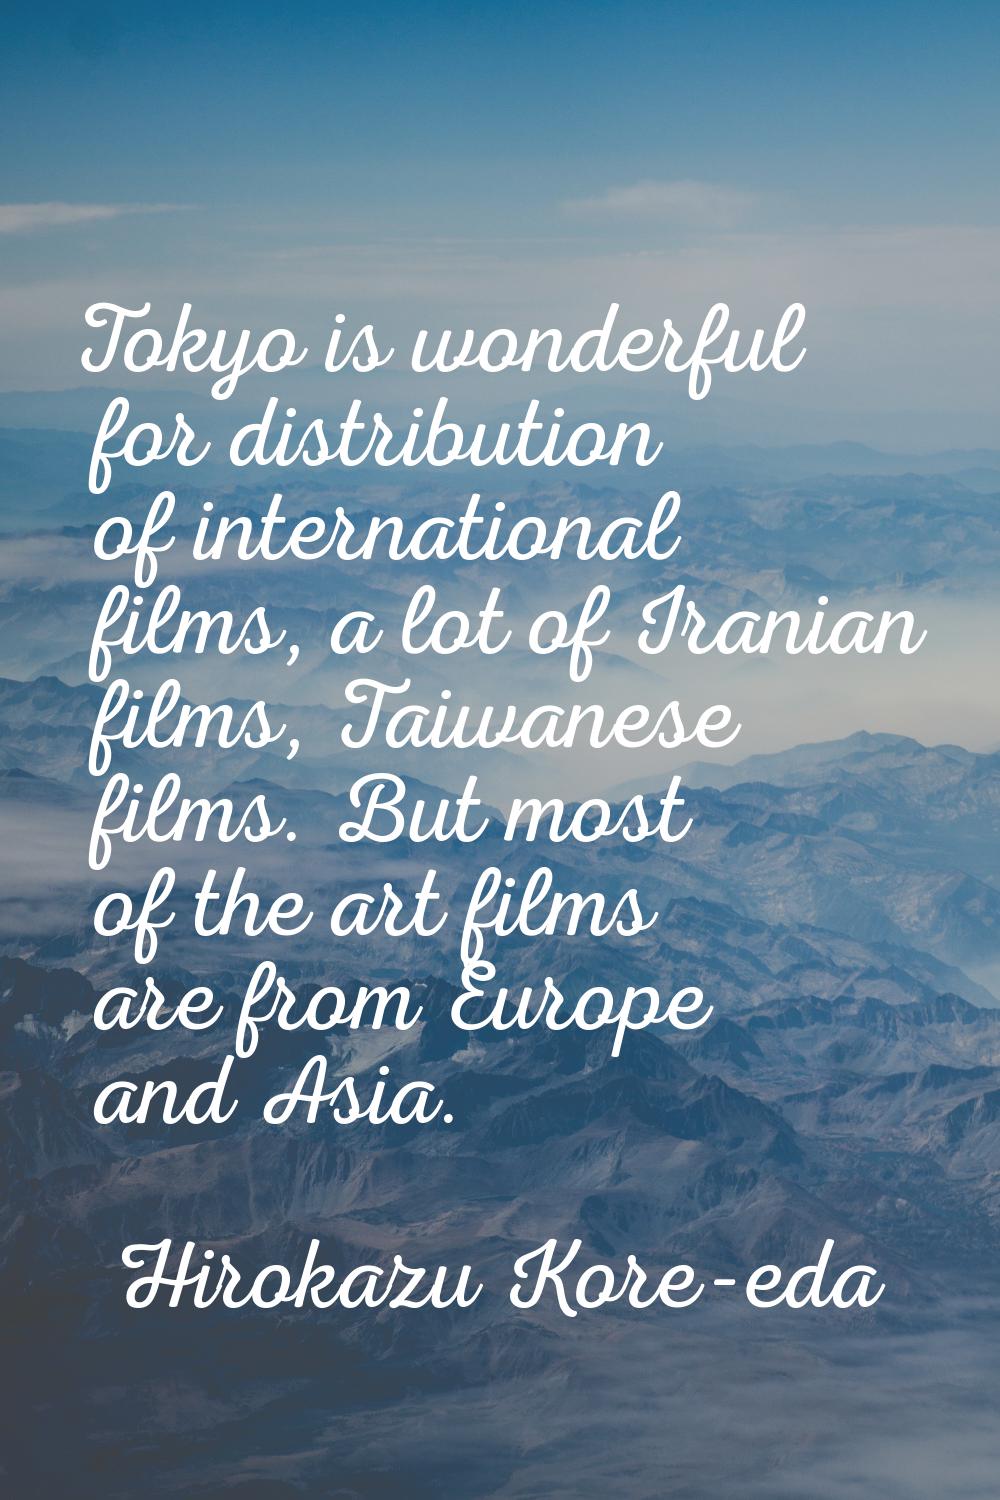 Tokyo is wonderful for distribution of international films, a lot of Iranian films, Taiwanese films